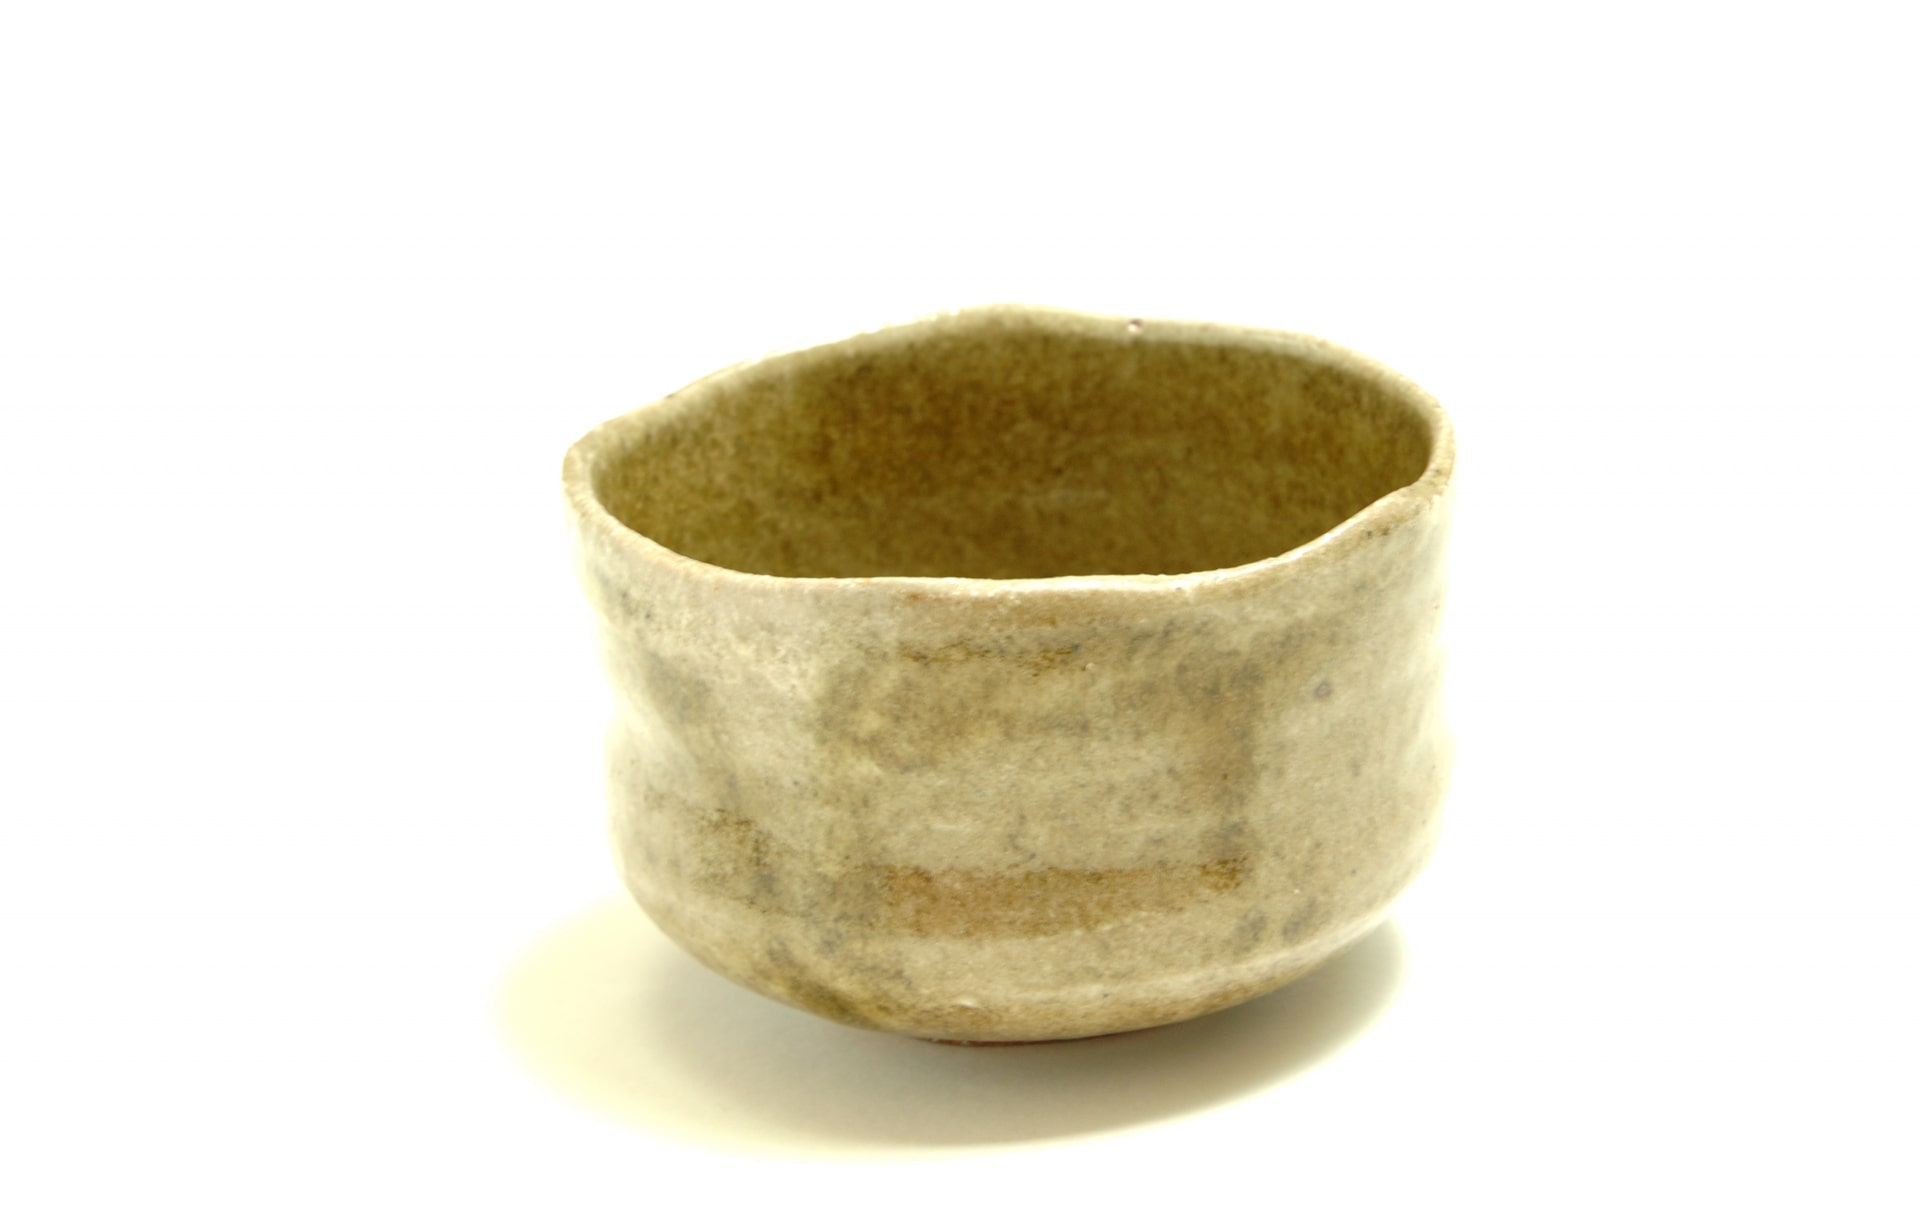 A Japanese tea ceremony cup representing the concept of wabi-sabi